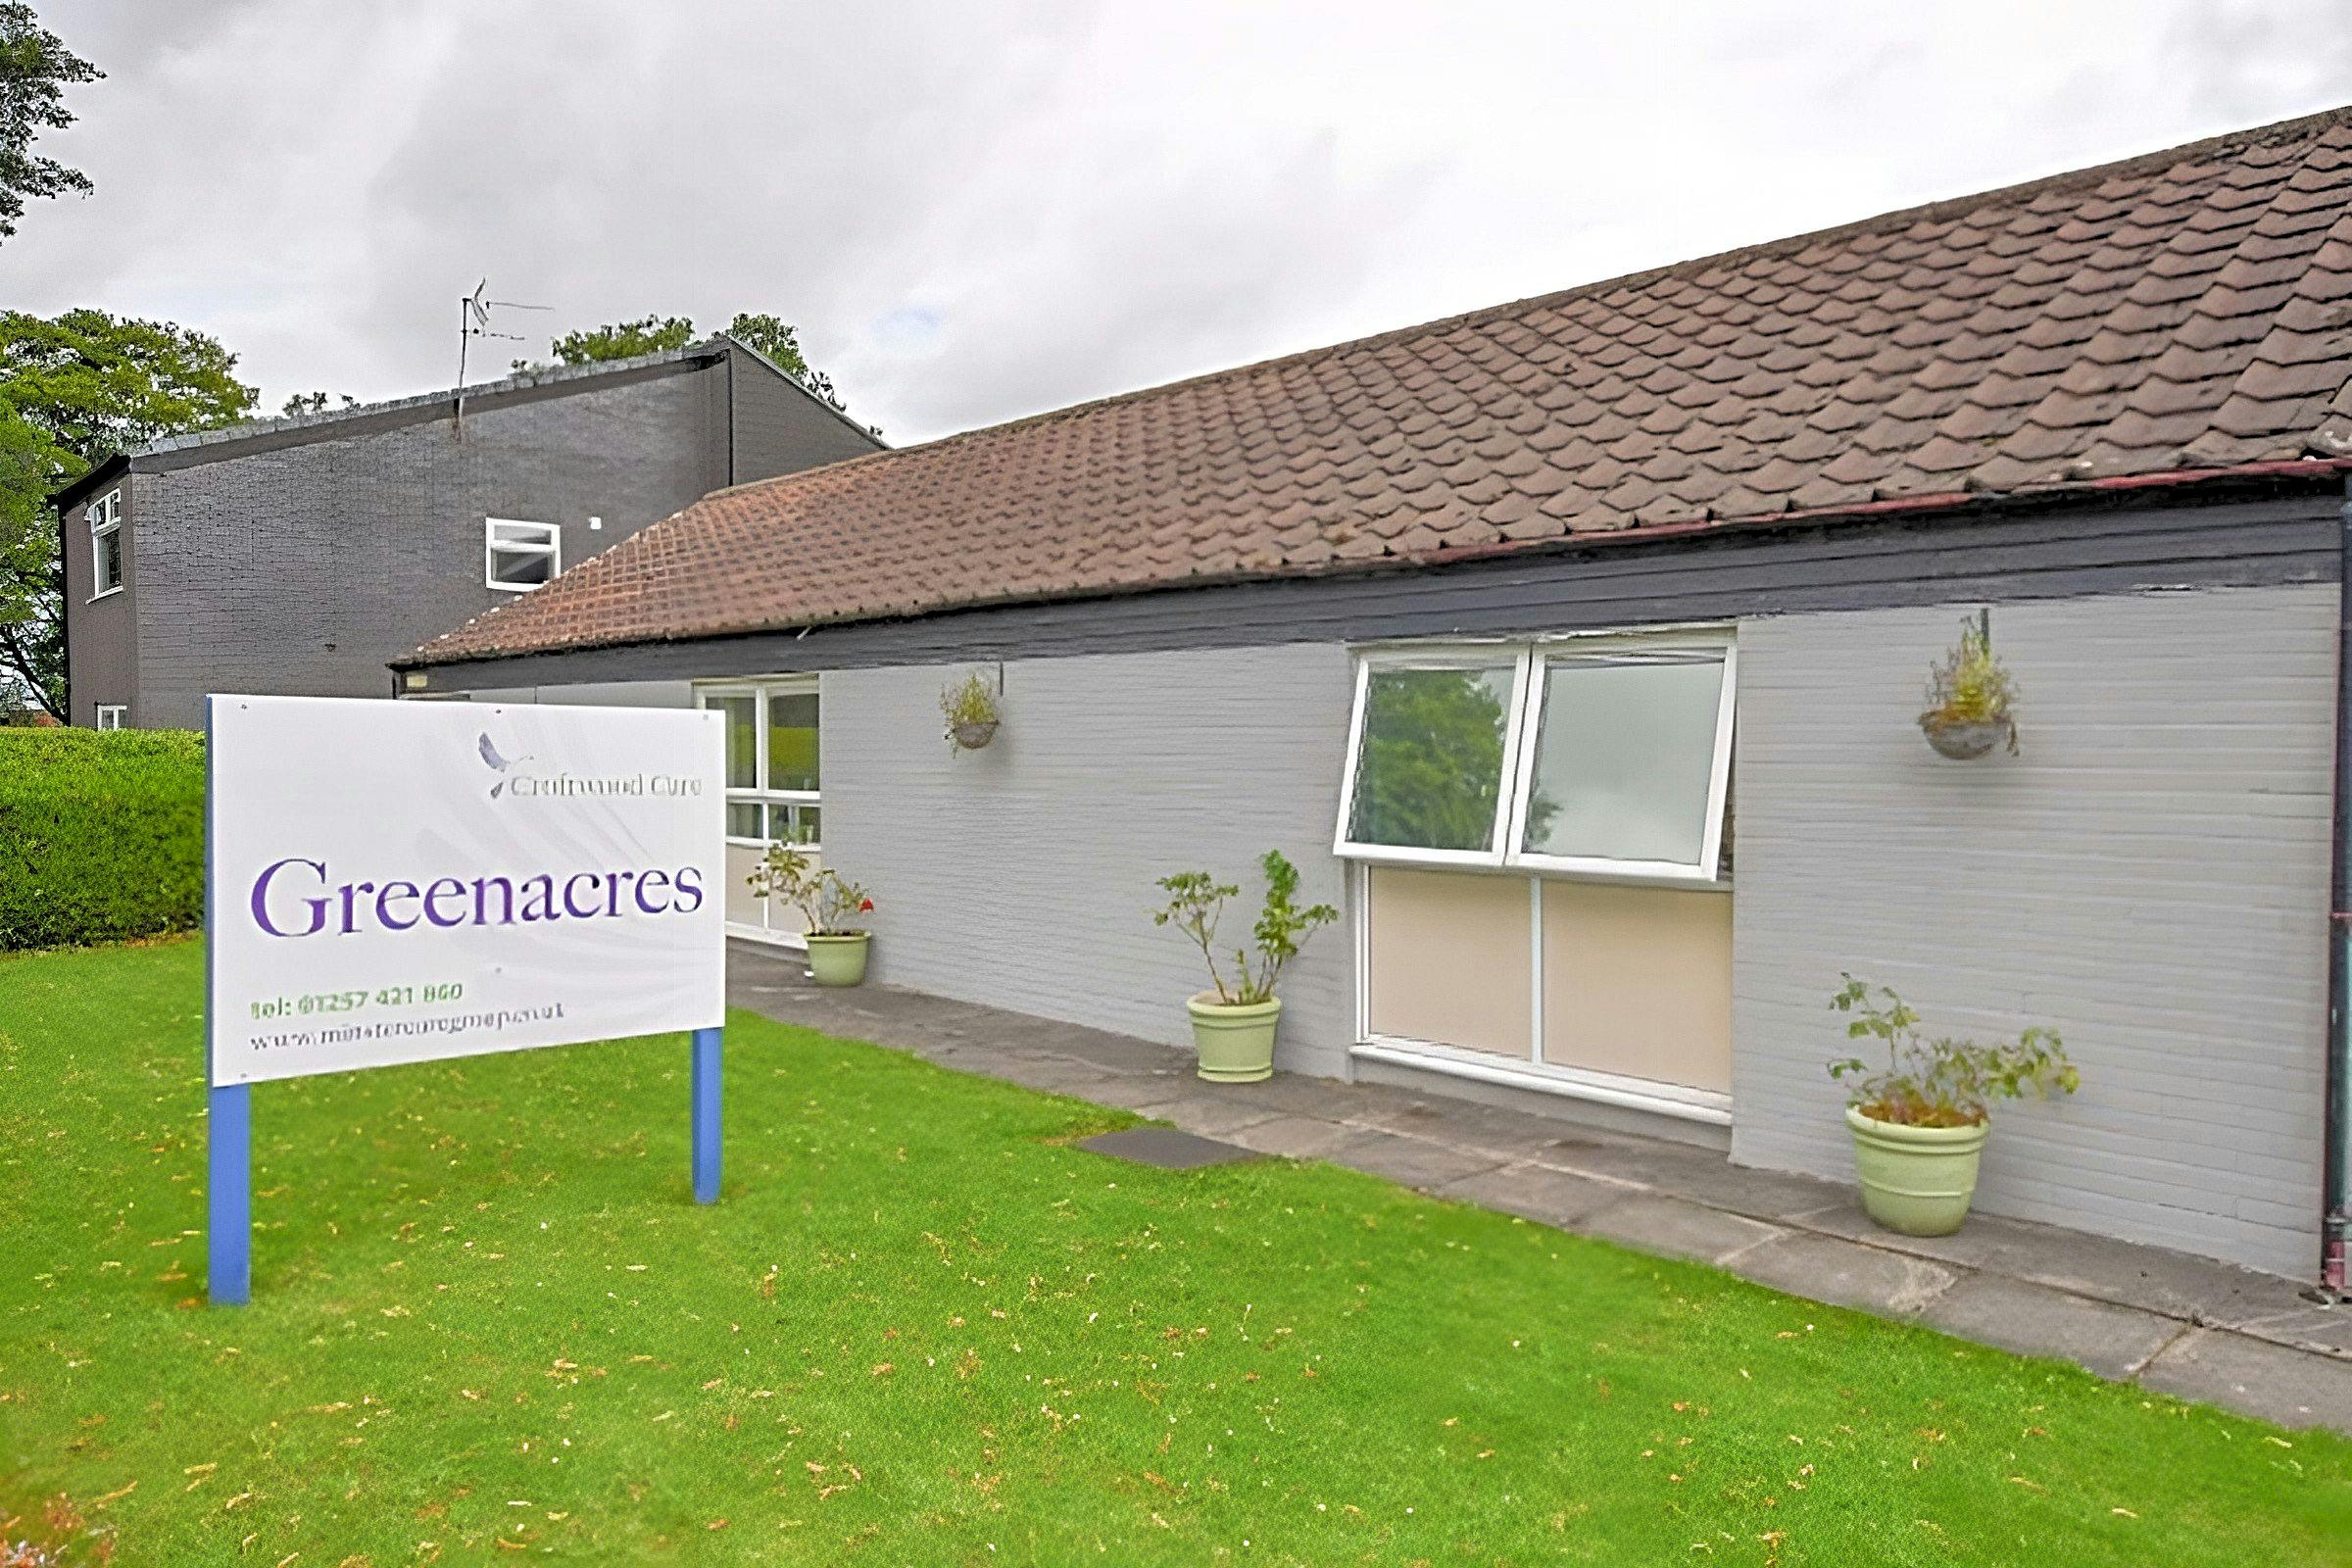 Minster Care Group - Greenacres care home 3